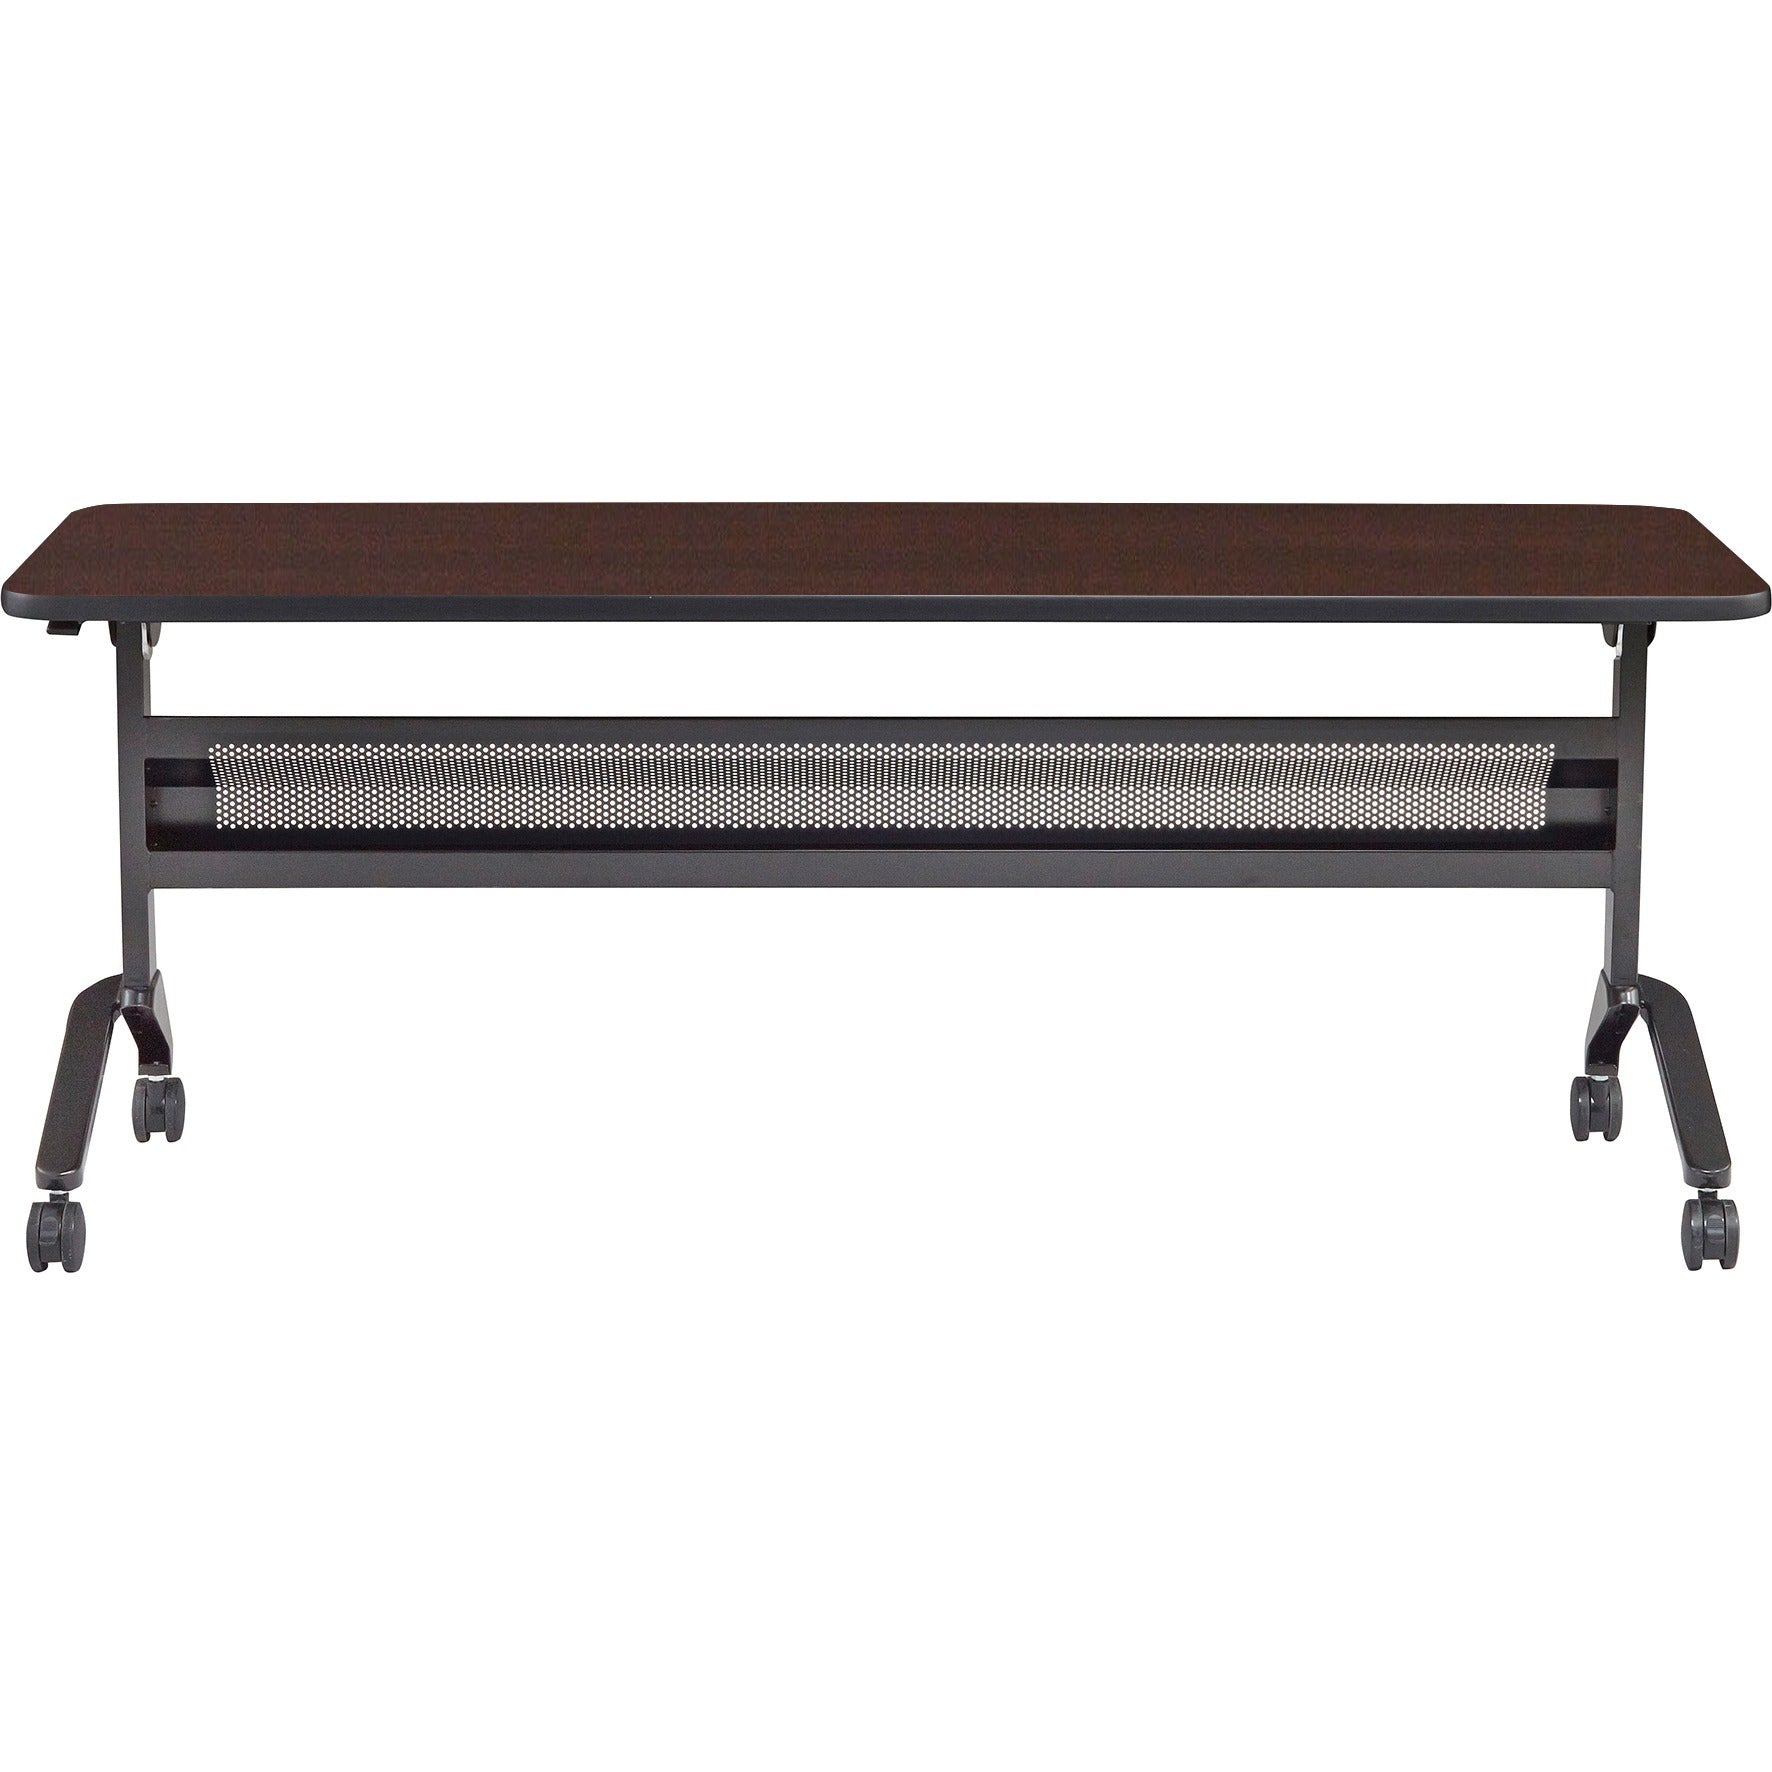 safco-flip-n-go-rectangular-training-table-for-table-topmocha-rectangle-top-black-base-150-lb-capacity-x-72-table-top-width-x-24-table-top-depth-x-120-table-top-thickness-29-height-assembly-required-low-pressure-laminate-lpl-top_saflf2472tsldcm - 2